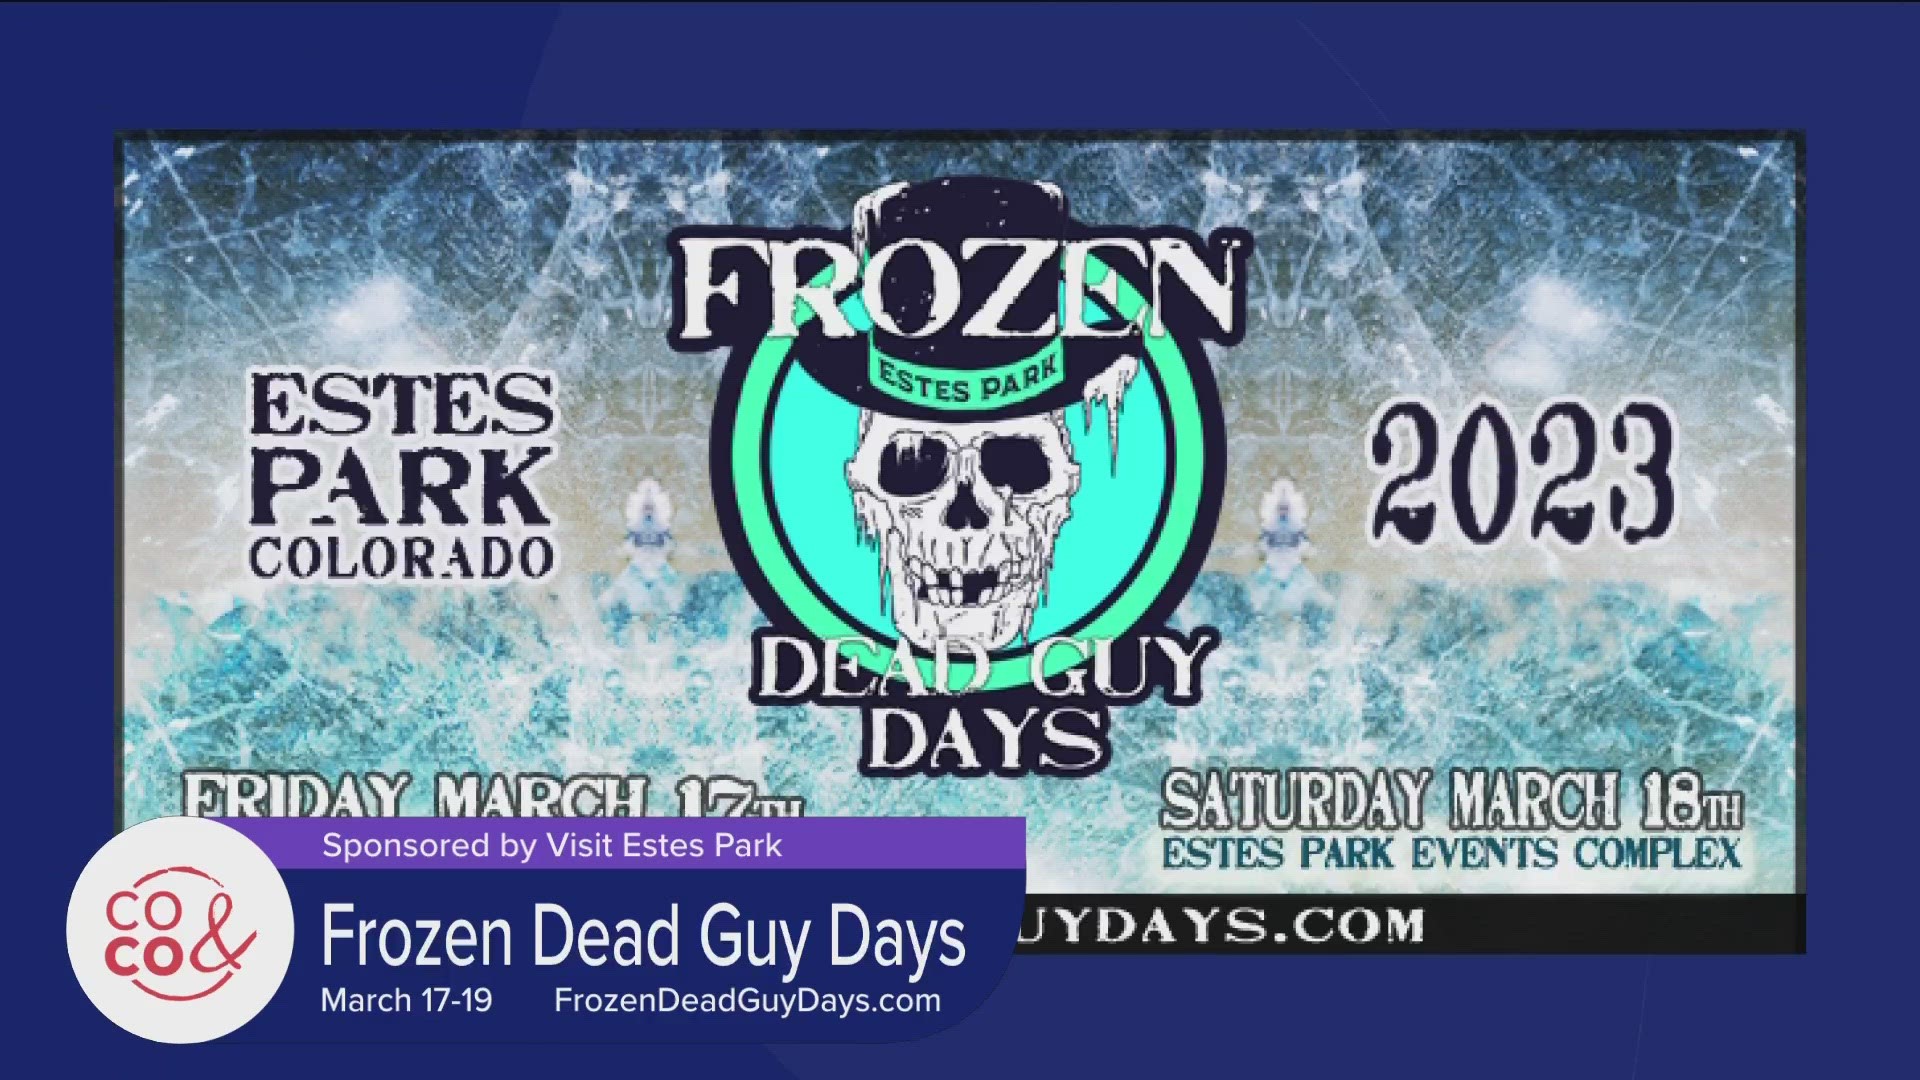 Frozen Dead Guy Days takes place from March 17 through 19 in Estes Park. Learn more and get tickets at FrozenDeadGuyDays.com. **PAID CONTENT**